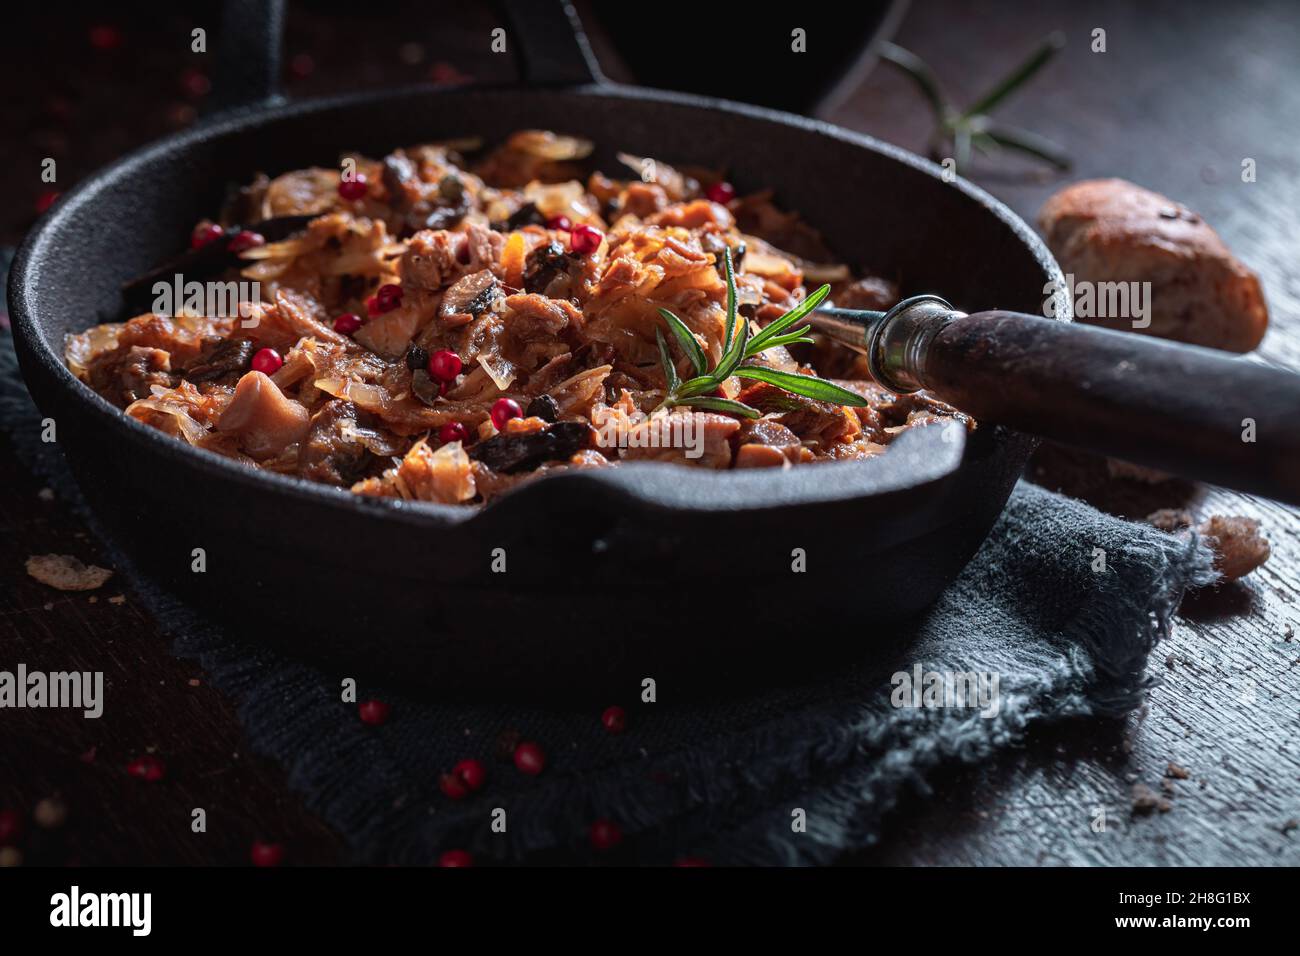 Hot cabbage and meat stew with cabbage and beef Bigos is traditional Polish food. Stock Photo